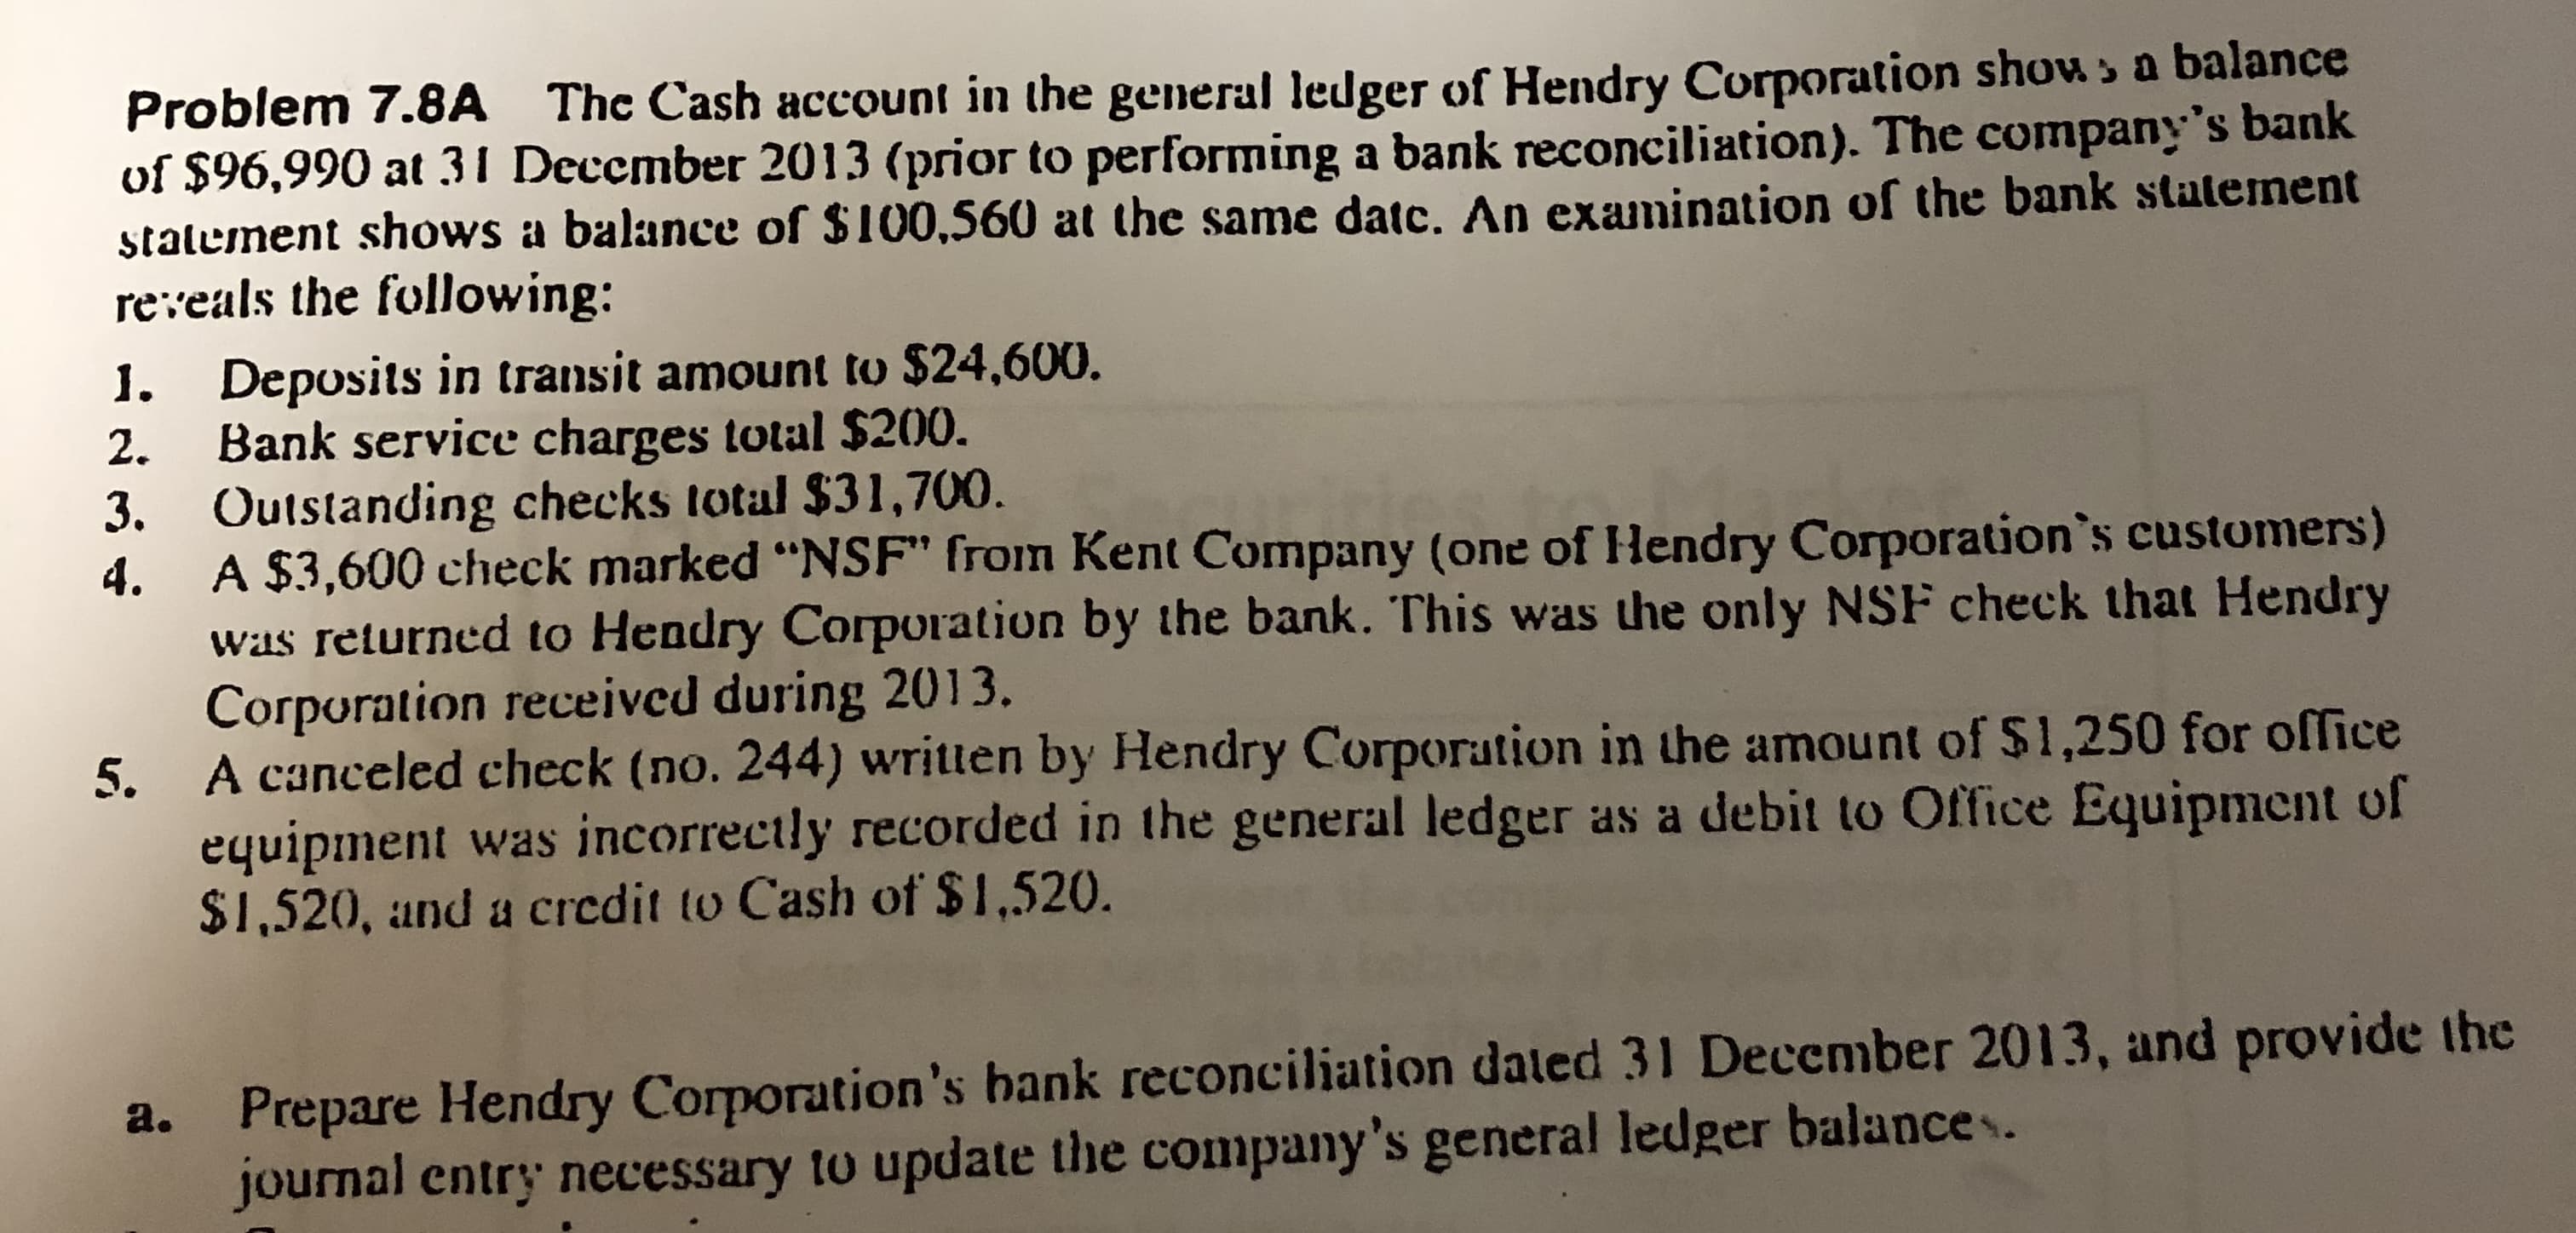 Problem 7.8A The Cash account in the general ledger of Hendry Corporation show> a balance
of $96,990 at 31 December 2013 (prior to performing a bank reconciliation). The company's bank
stalement shows a balance of $100,560 at the same datc. An examination of the bank statement
reveals the following:
1. Deposits in transit amount to $24,600.
Bank service charges total $200.
3. Outstanding checks total $31,700.
A $3,600 check marked "NSF" from Kent Company (one of Hendry Corporation*s customers)
was returned to Hendry Corporation by the bank. This was the only NSF check that Hendry
Corporation received during 2013.
A canceled check (no. 244) written by Hendry Corporation in the amount of $1,250 for office
equipment was incorrectly recorded in the general ledger as a debit to Office Equipment of
$1,520, and a credit to Cash of $1,520.
2.
4.
5.
Prepare Hendry Corporation's bank reconciliation daled 31 December 2013, and provide the
journal entry necessary to update the company's general ledger balances.
a.
